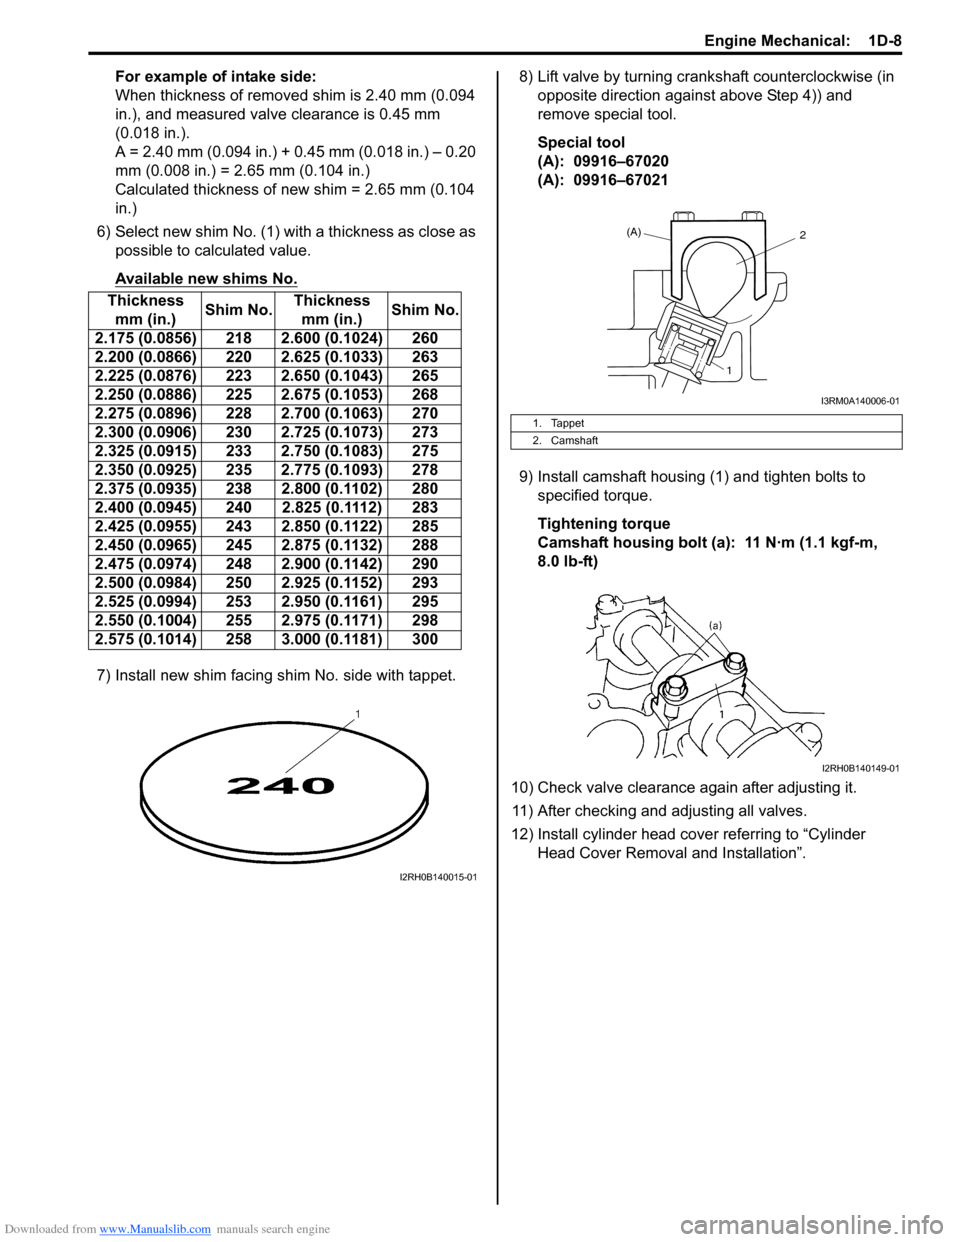 SUZUKI SWIFT 2005 2.G Service Workshop Manual Downloaded from www.Manualslib.com manuals search engine Engine Mechanical:  1D-8
For example of intake side:
When thickness of removed shim is 2.40 mm (0.094 
in.), and measured valve clearance is 0.